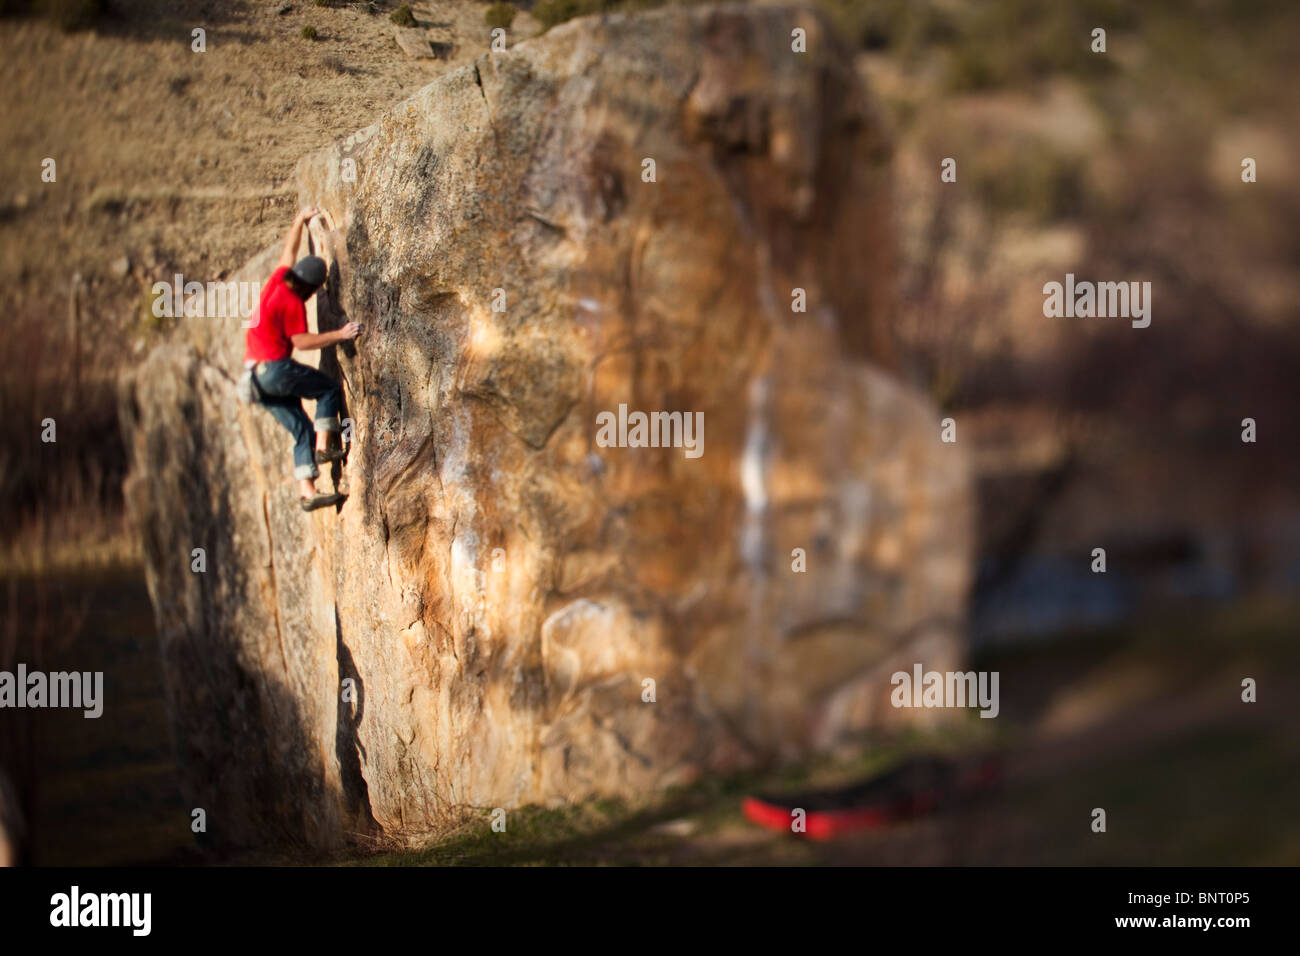 A rock climber works on bouldering problem in Colorado. Stock Photo